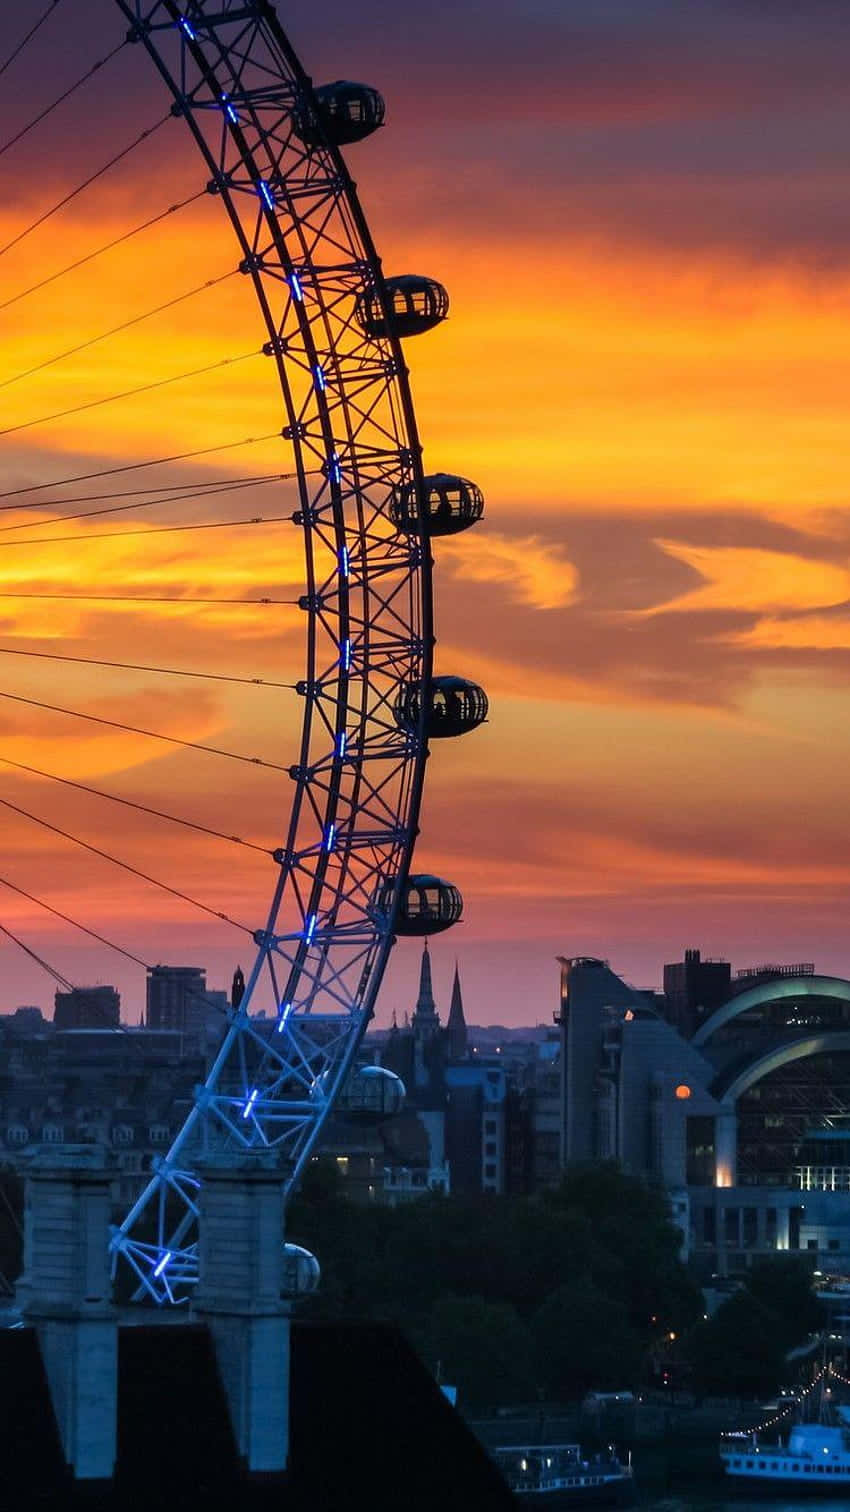 “Capture the iconic skyline of London with this stunning London iPhone wallpaper” Wallpaper